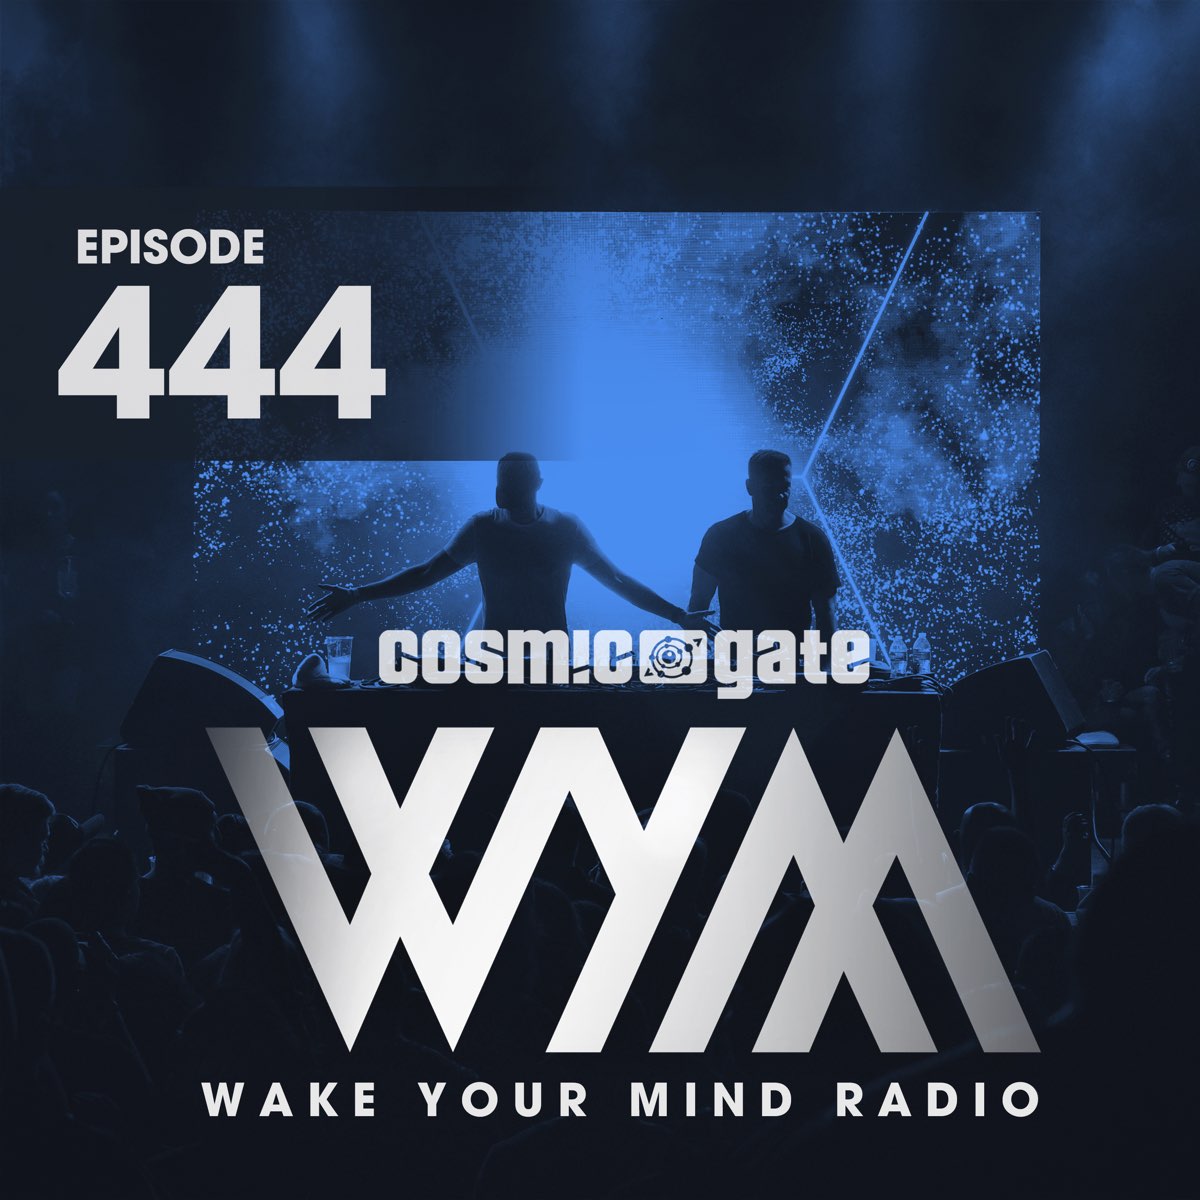 Wake Your Mind Radio 444 by Cosmic Gate on Apple Music